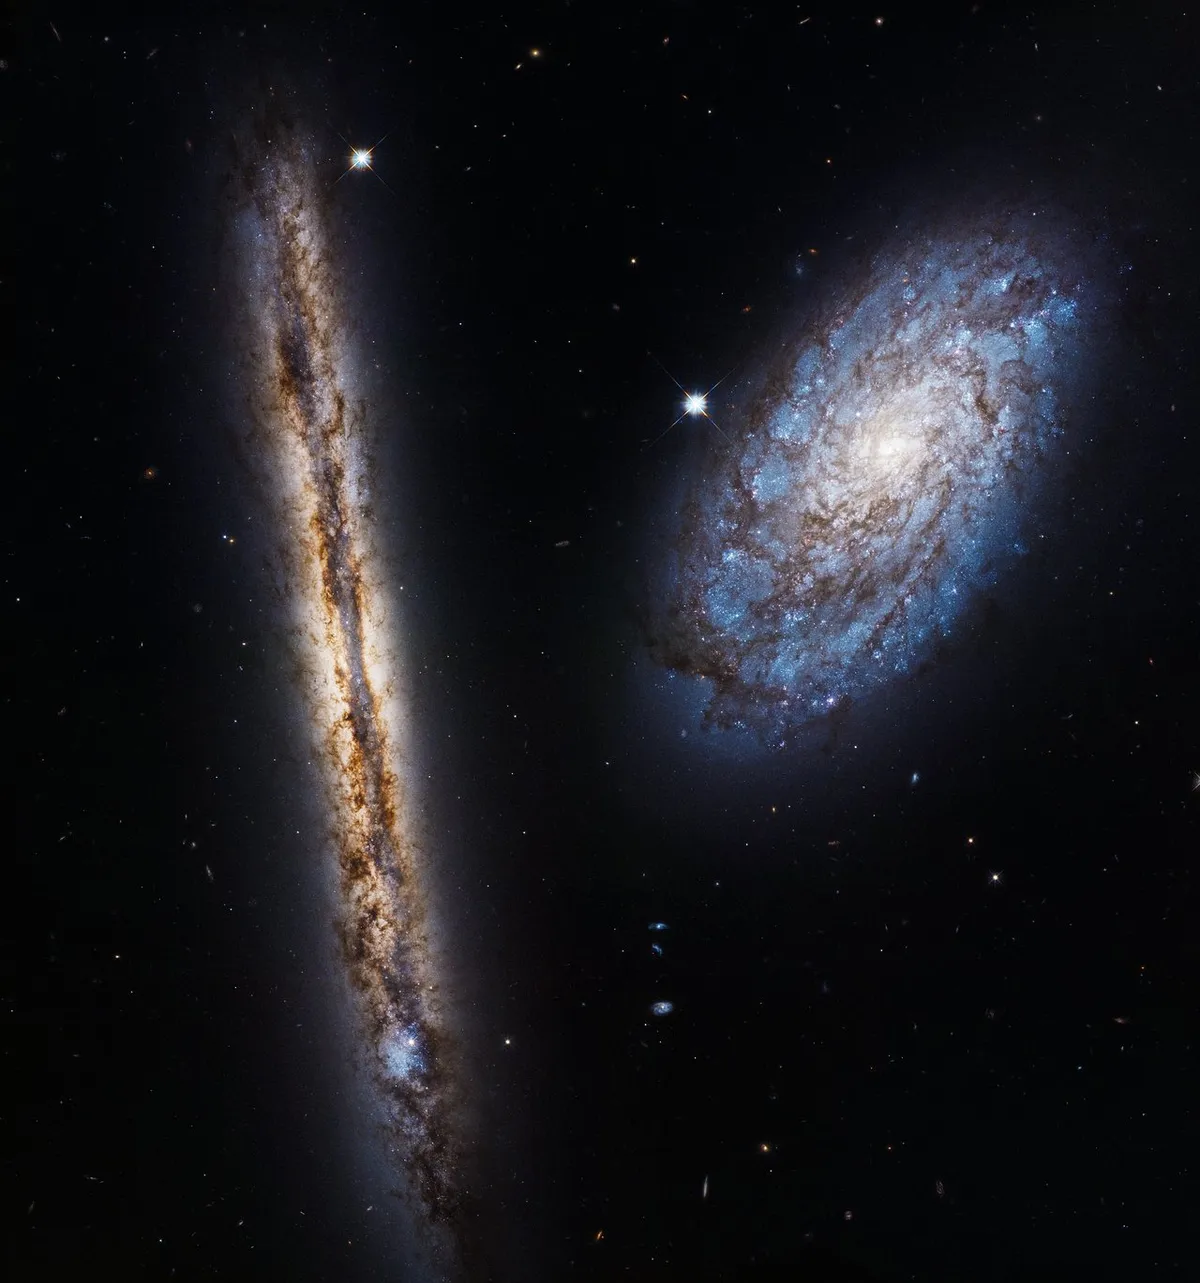 Galactic pairing 20 April 2017. Galaxies NGC 4302, seen edge-on, and NGC 4298, both located 55 million lightyears away. Credit: NASA, ESA, and M. Mutchler (STScI)